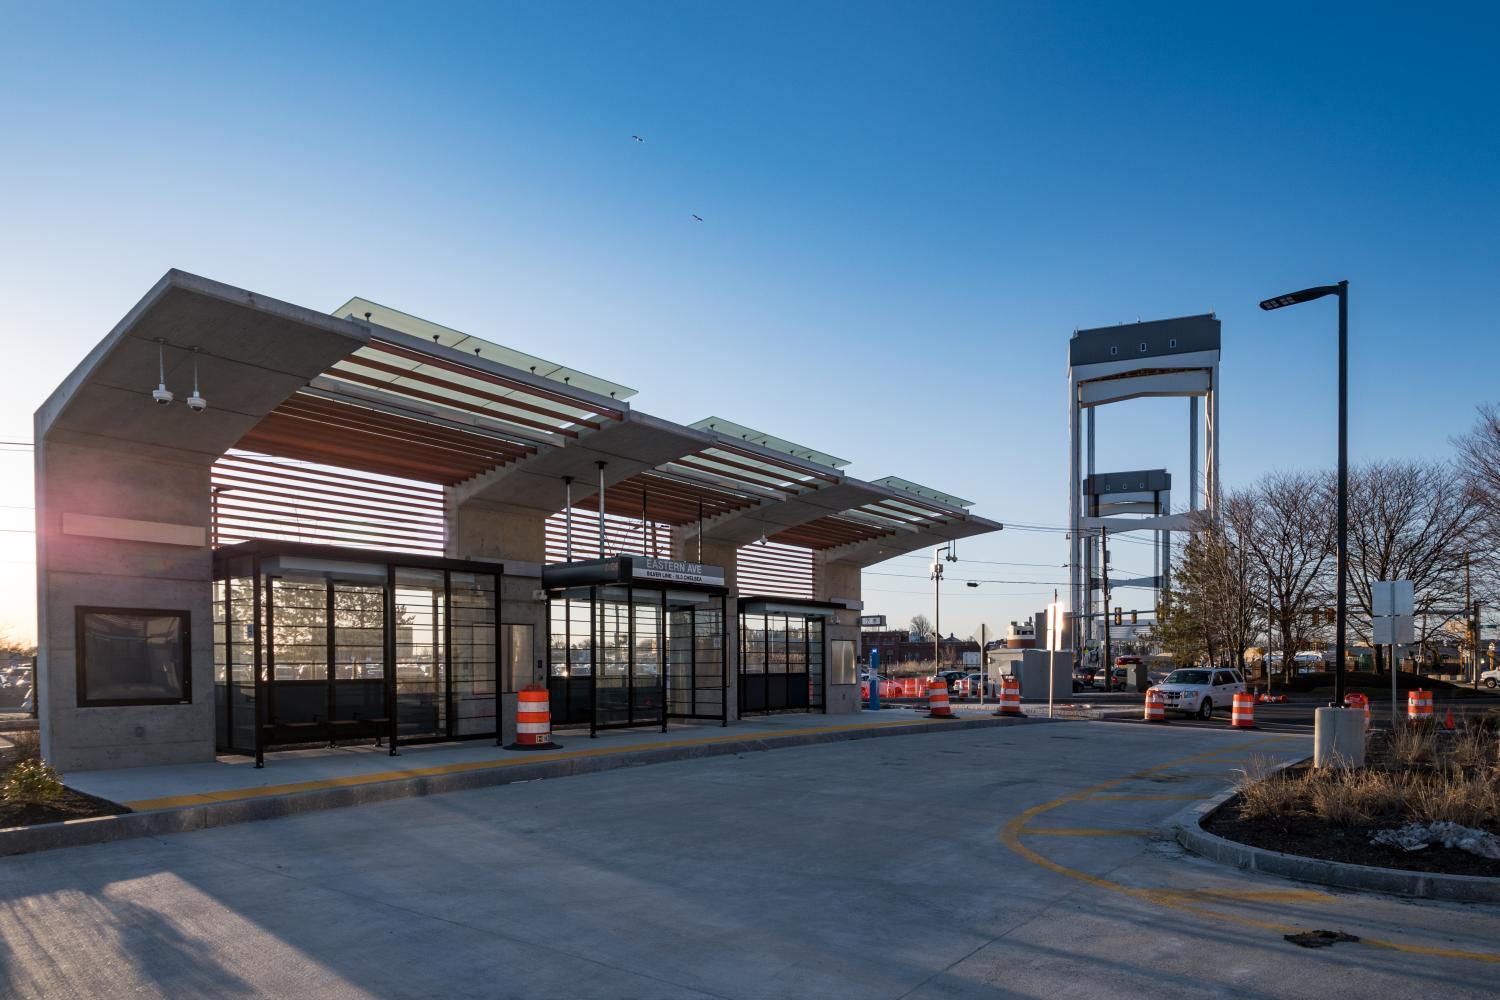 The new Eastern Ave Station